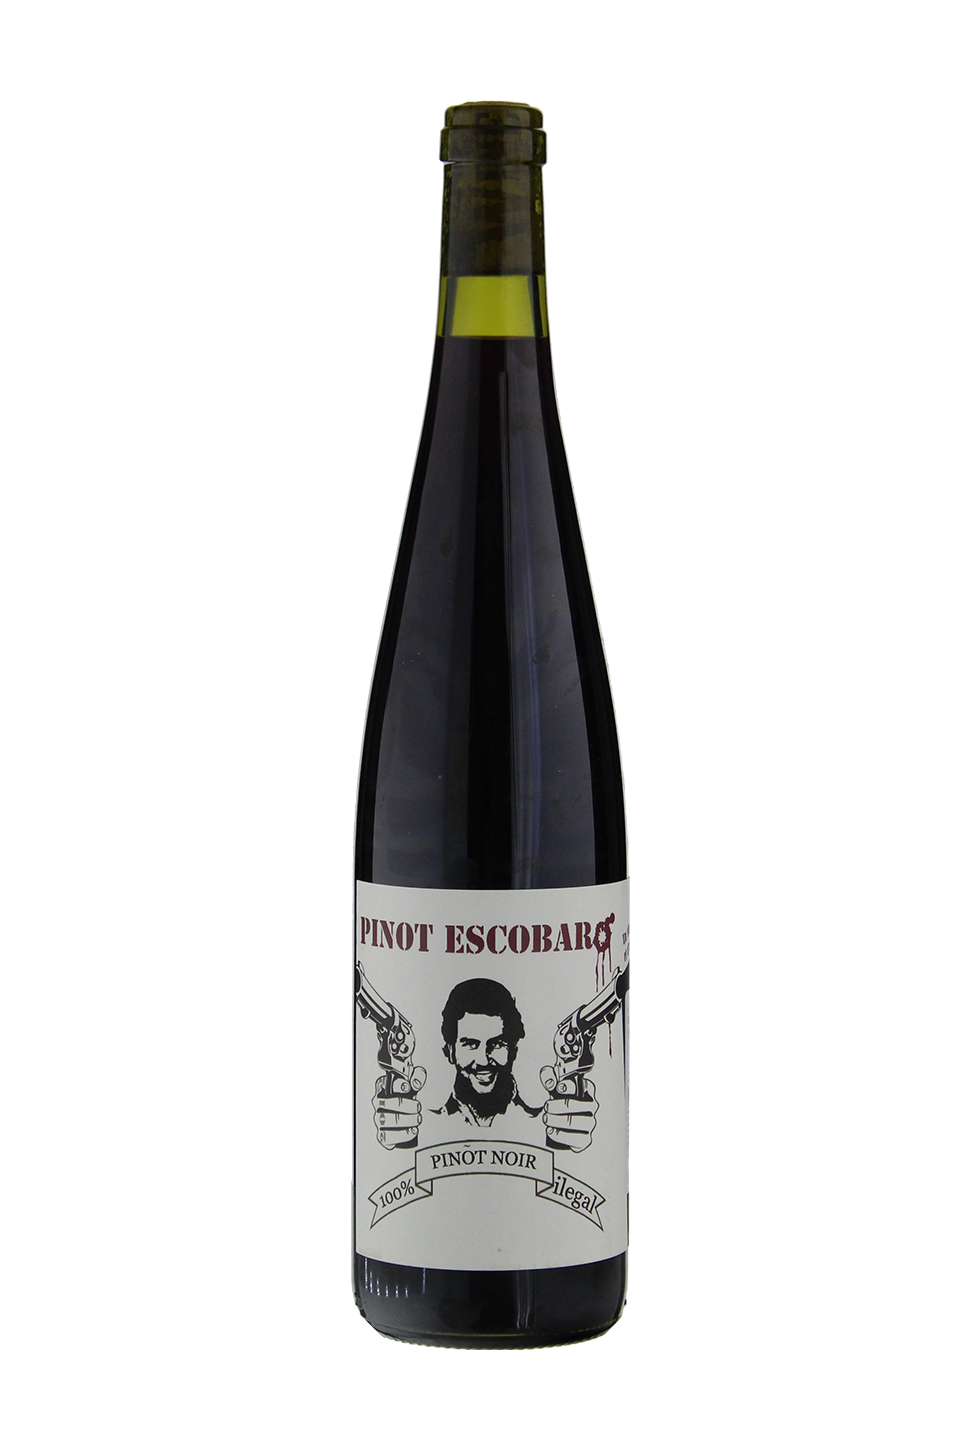 Sons of Wine Pinot Escobar VdF